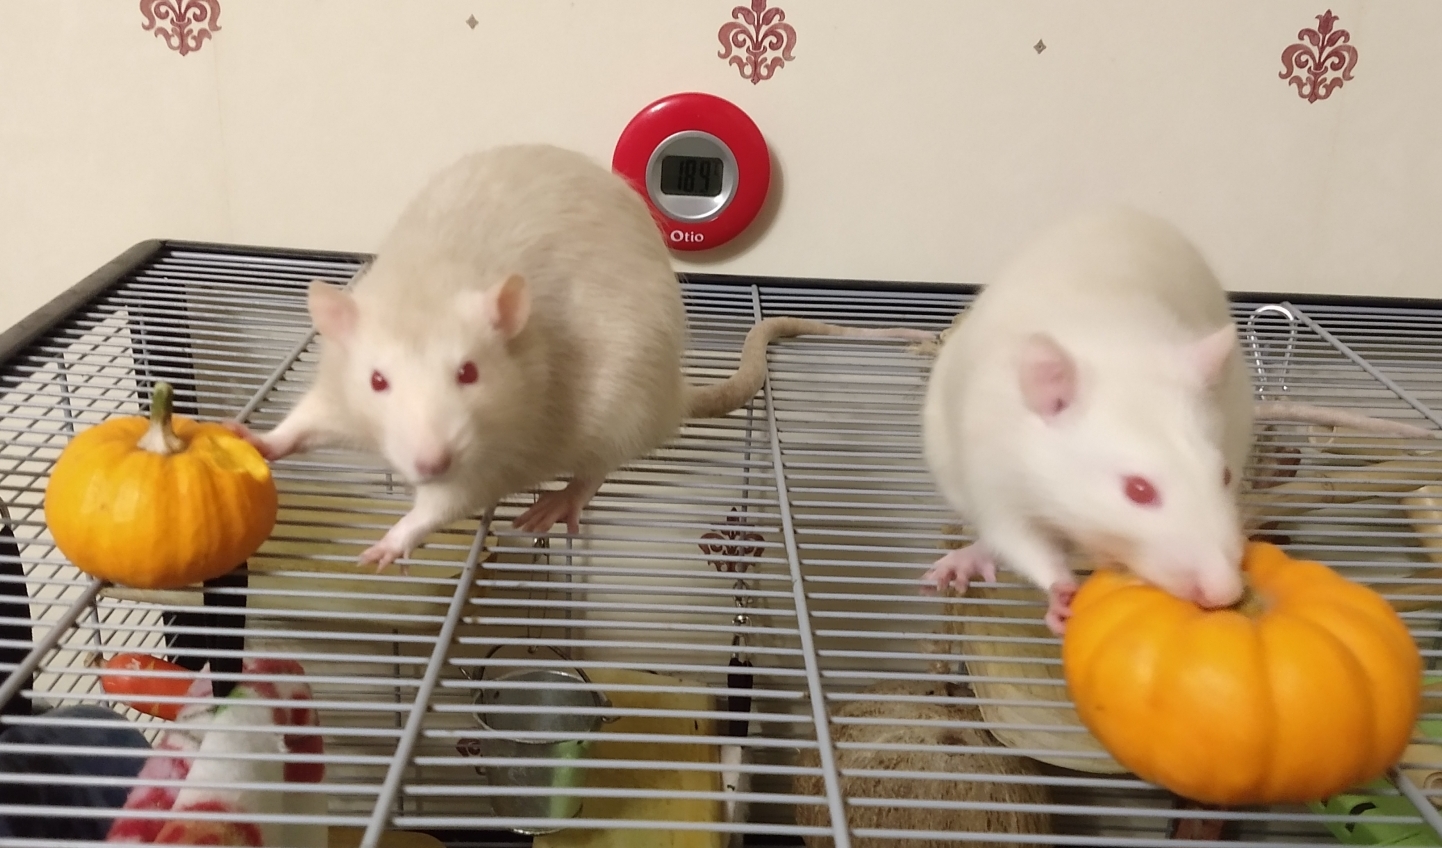 With their pumpkins, Oct 2019.